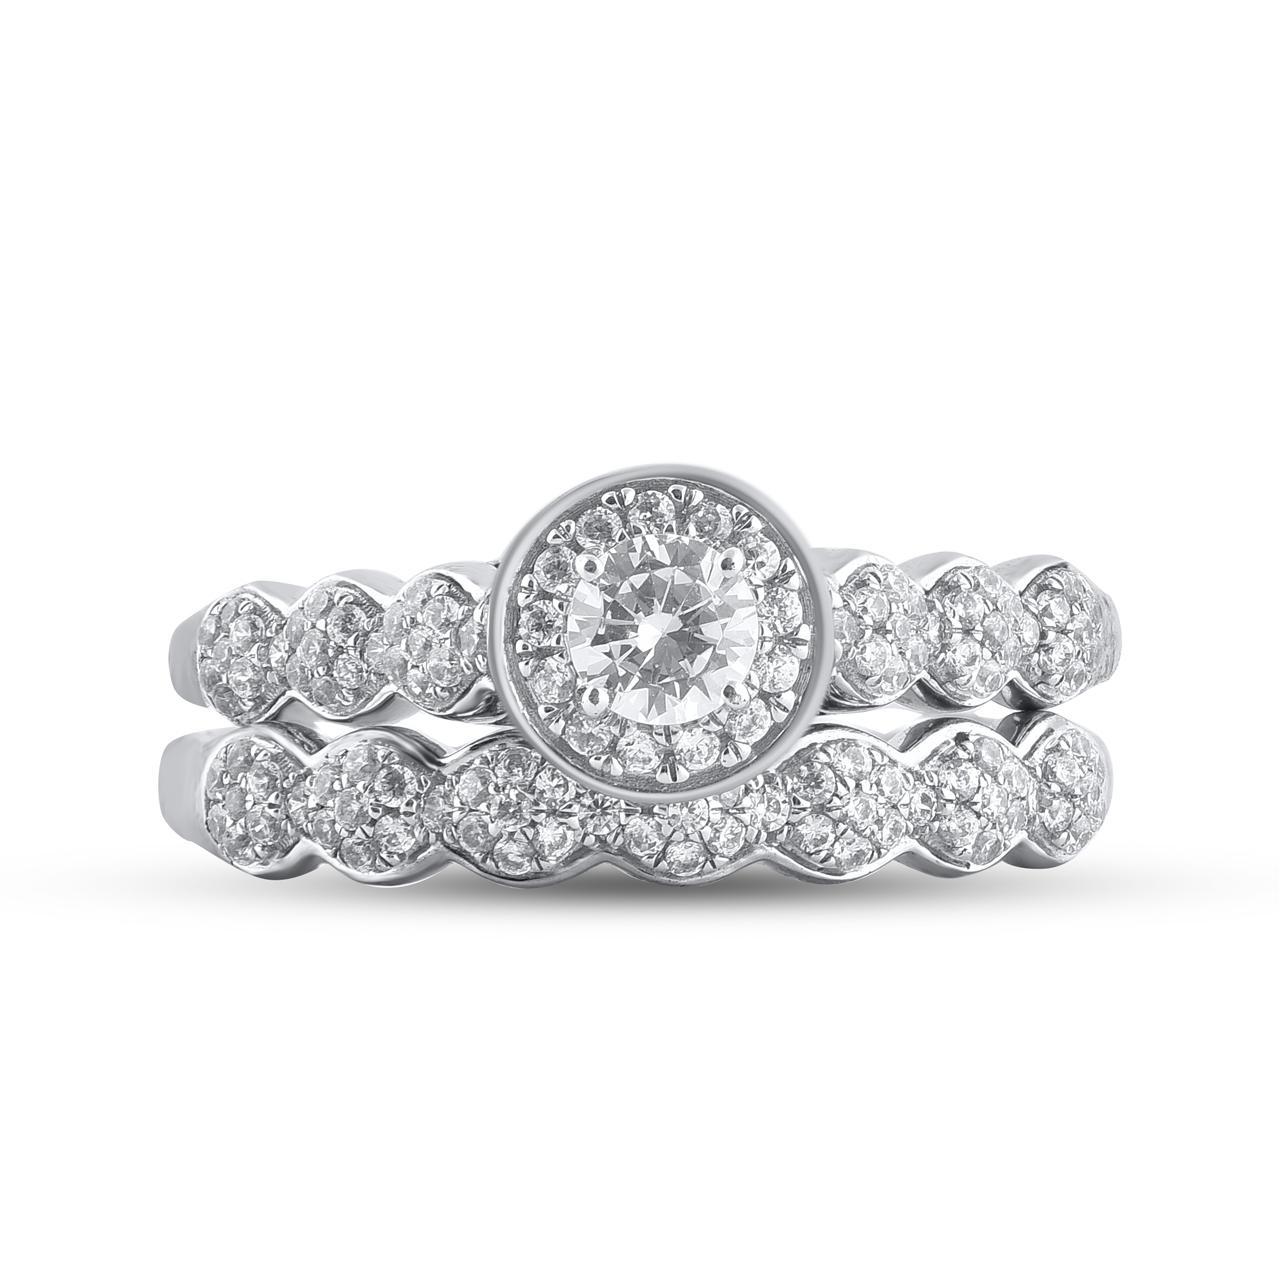 Express your everlasting love with this exceptional diamond bridal ring set. Crafted in 14 Karat white gold. This wedding ring features a sparkling 117 single cut and brilliant cut round diamonds beautifully set in prong & pave setting. The total